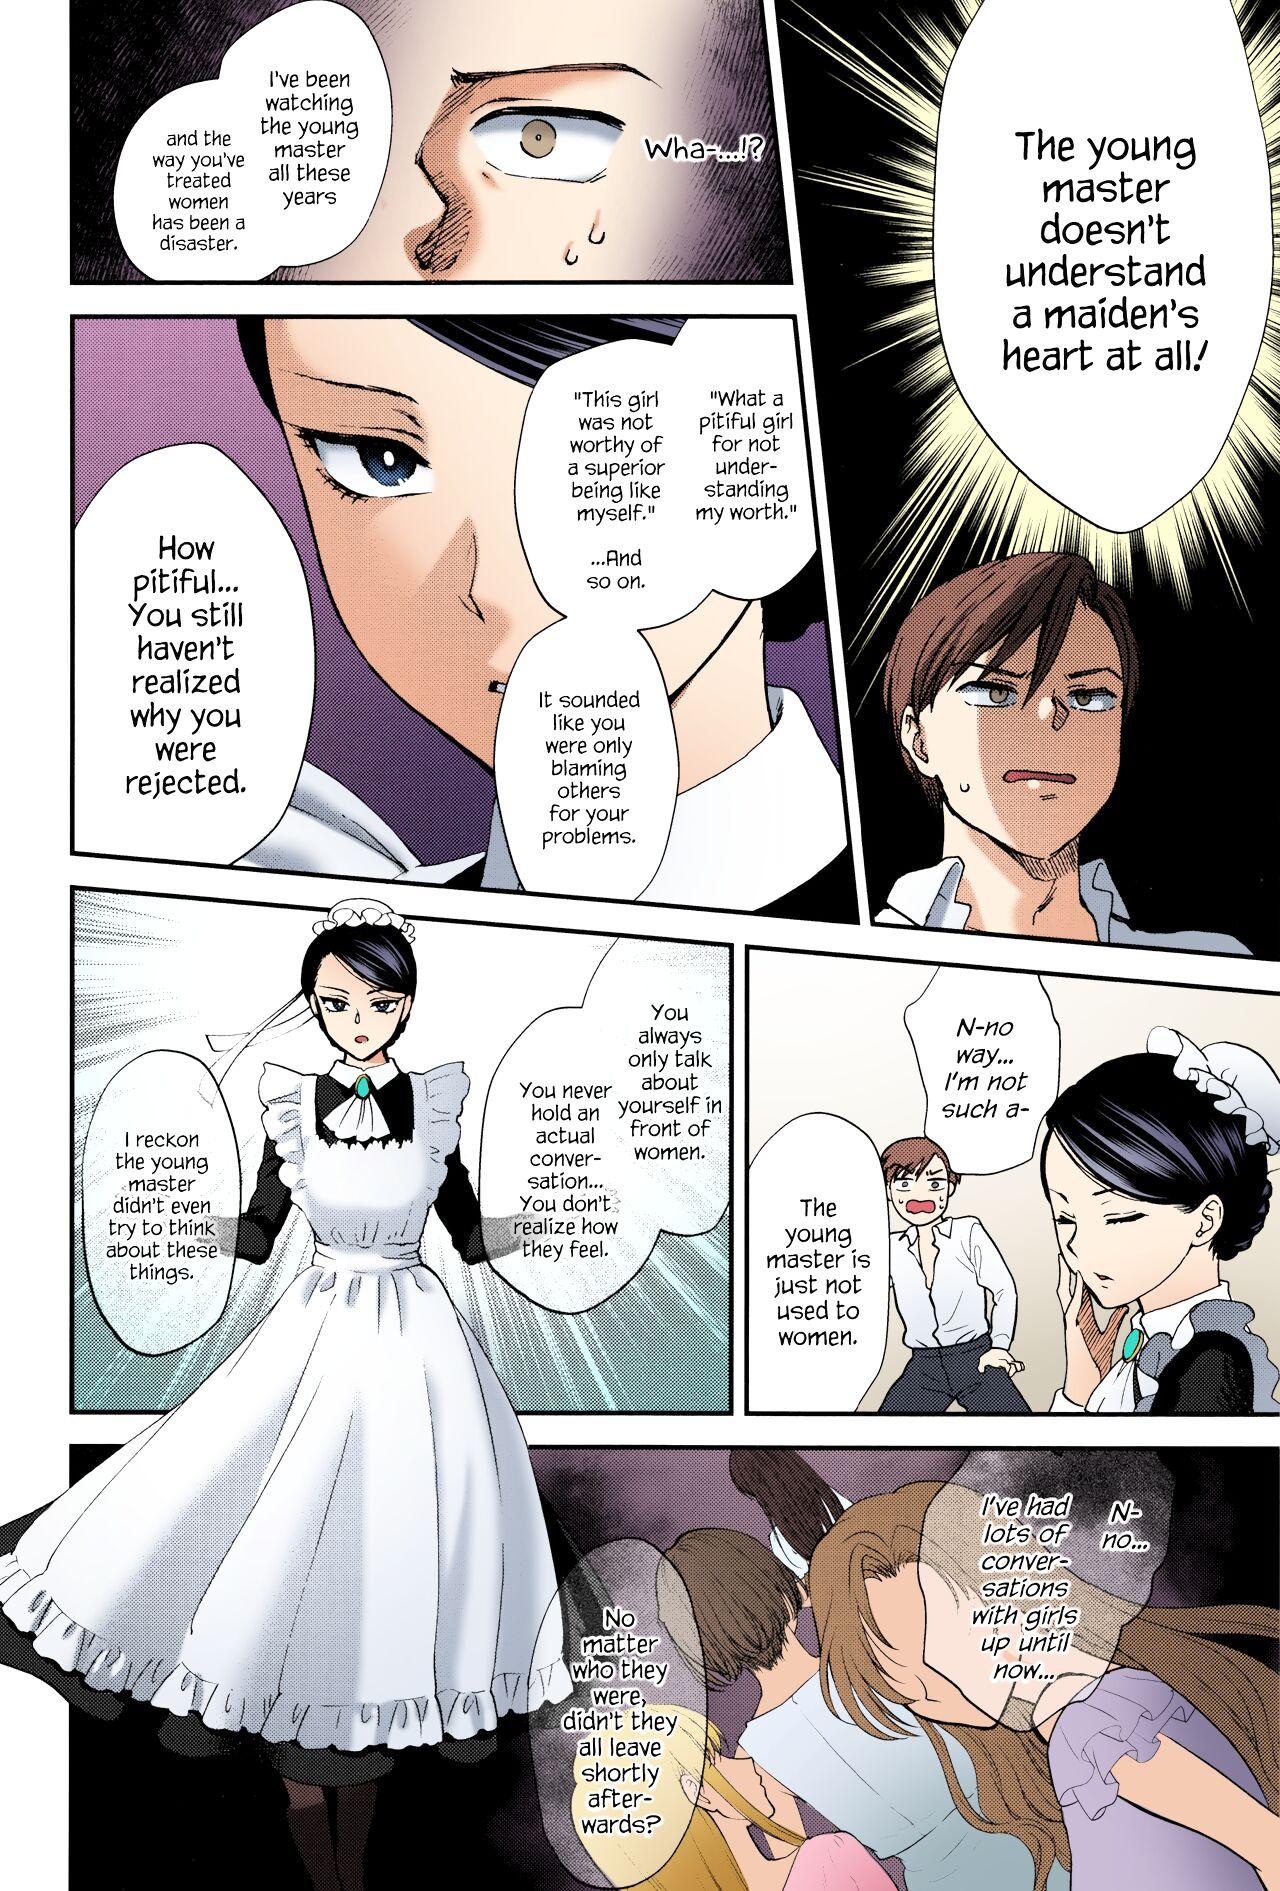 Chudai Kyoudou Well Maid - The Well “Maid” Instructor - Original Thuylinh - Page 4